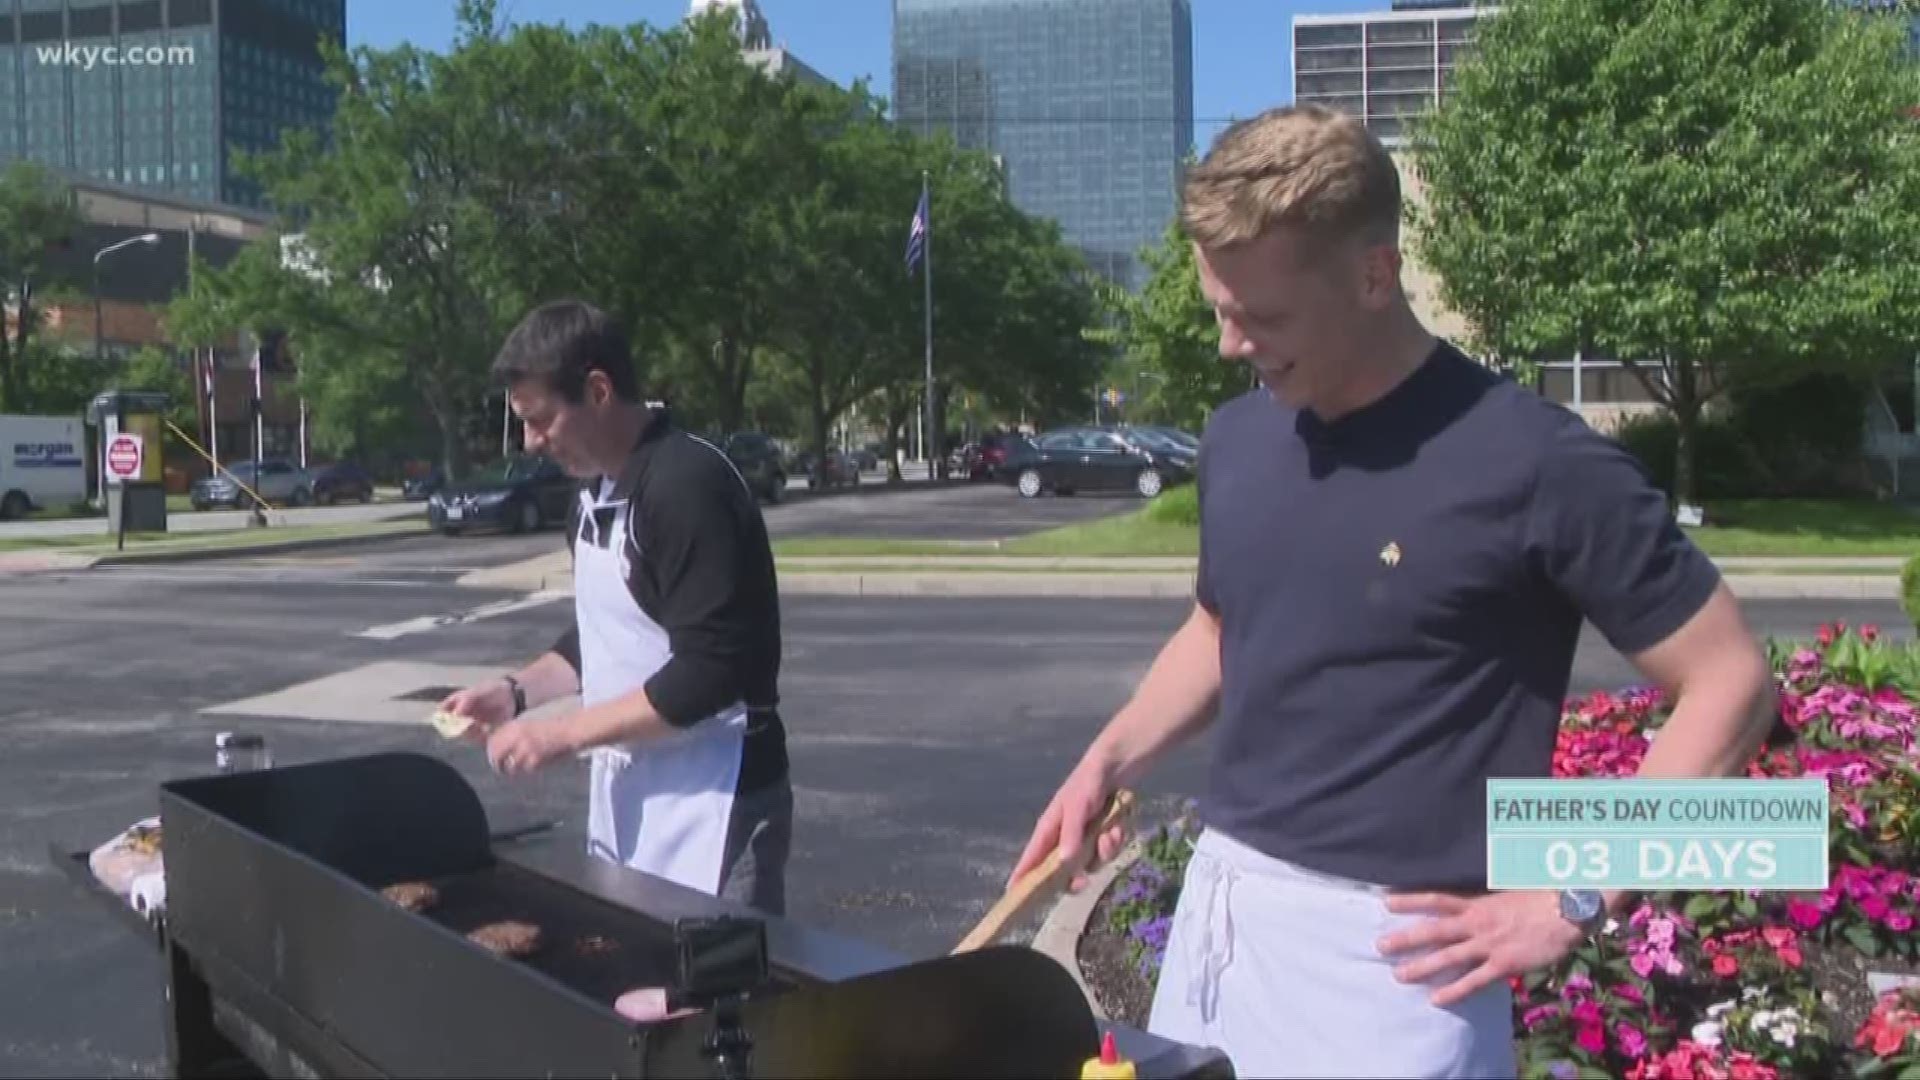 June 13, 2019: Who makes the better burger? Austin Love and Dave Chudowsky showed off their grilling skills in an epic showdown just ahead of Father's Day.